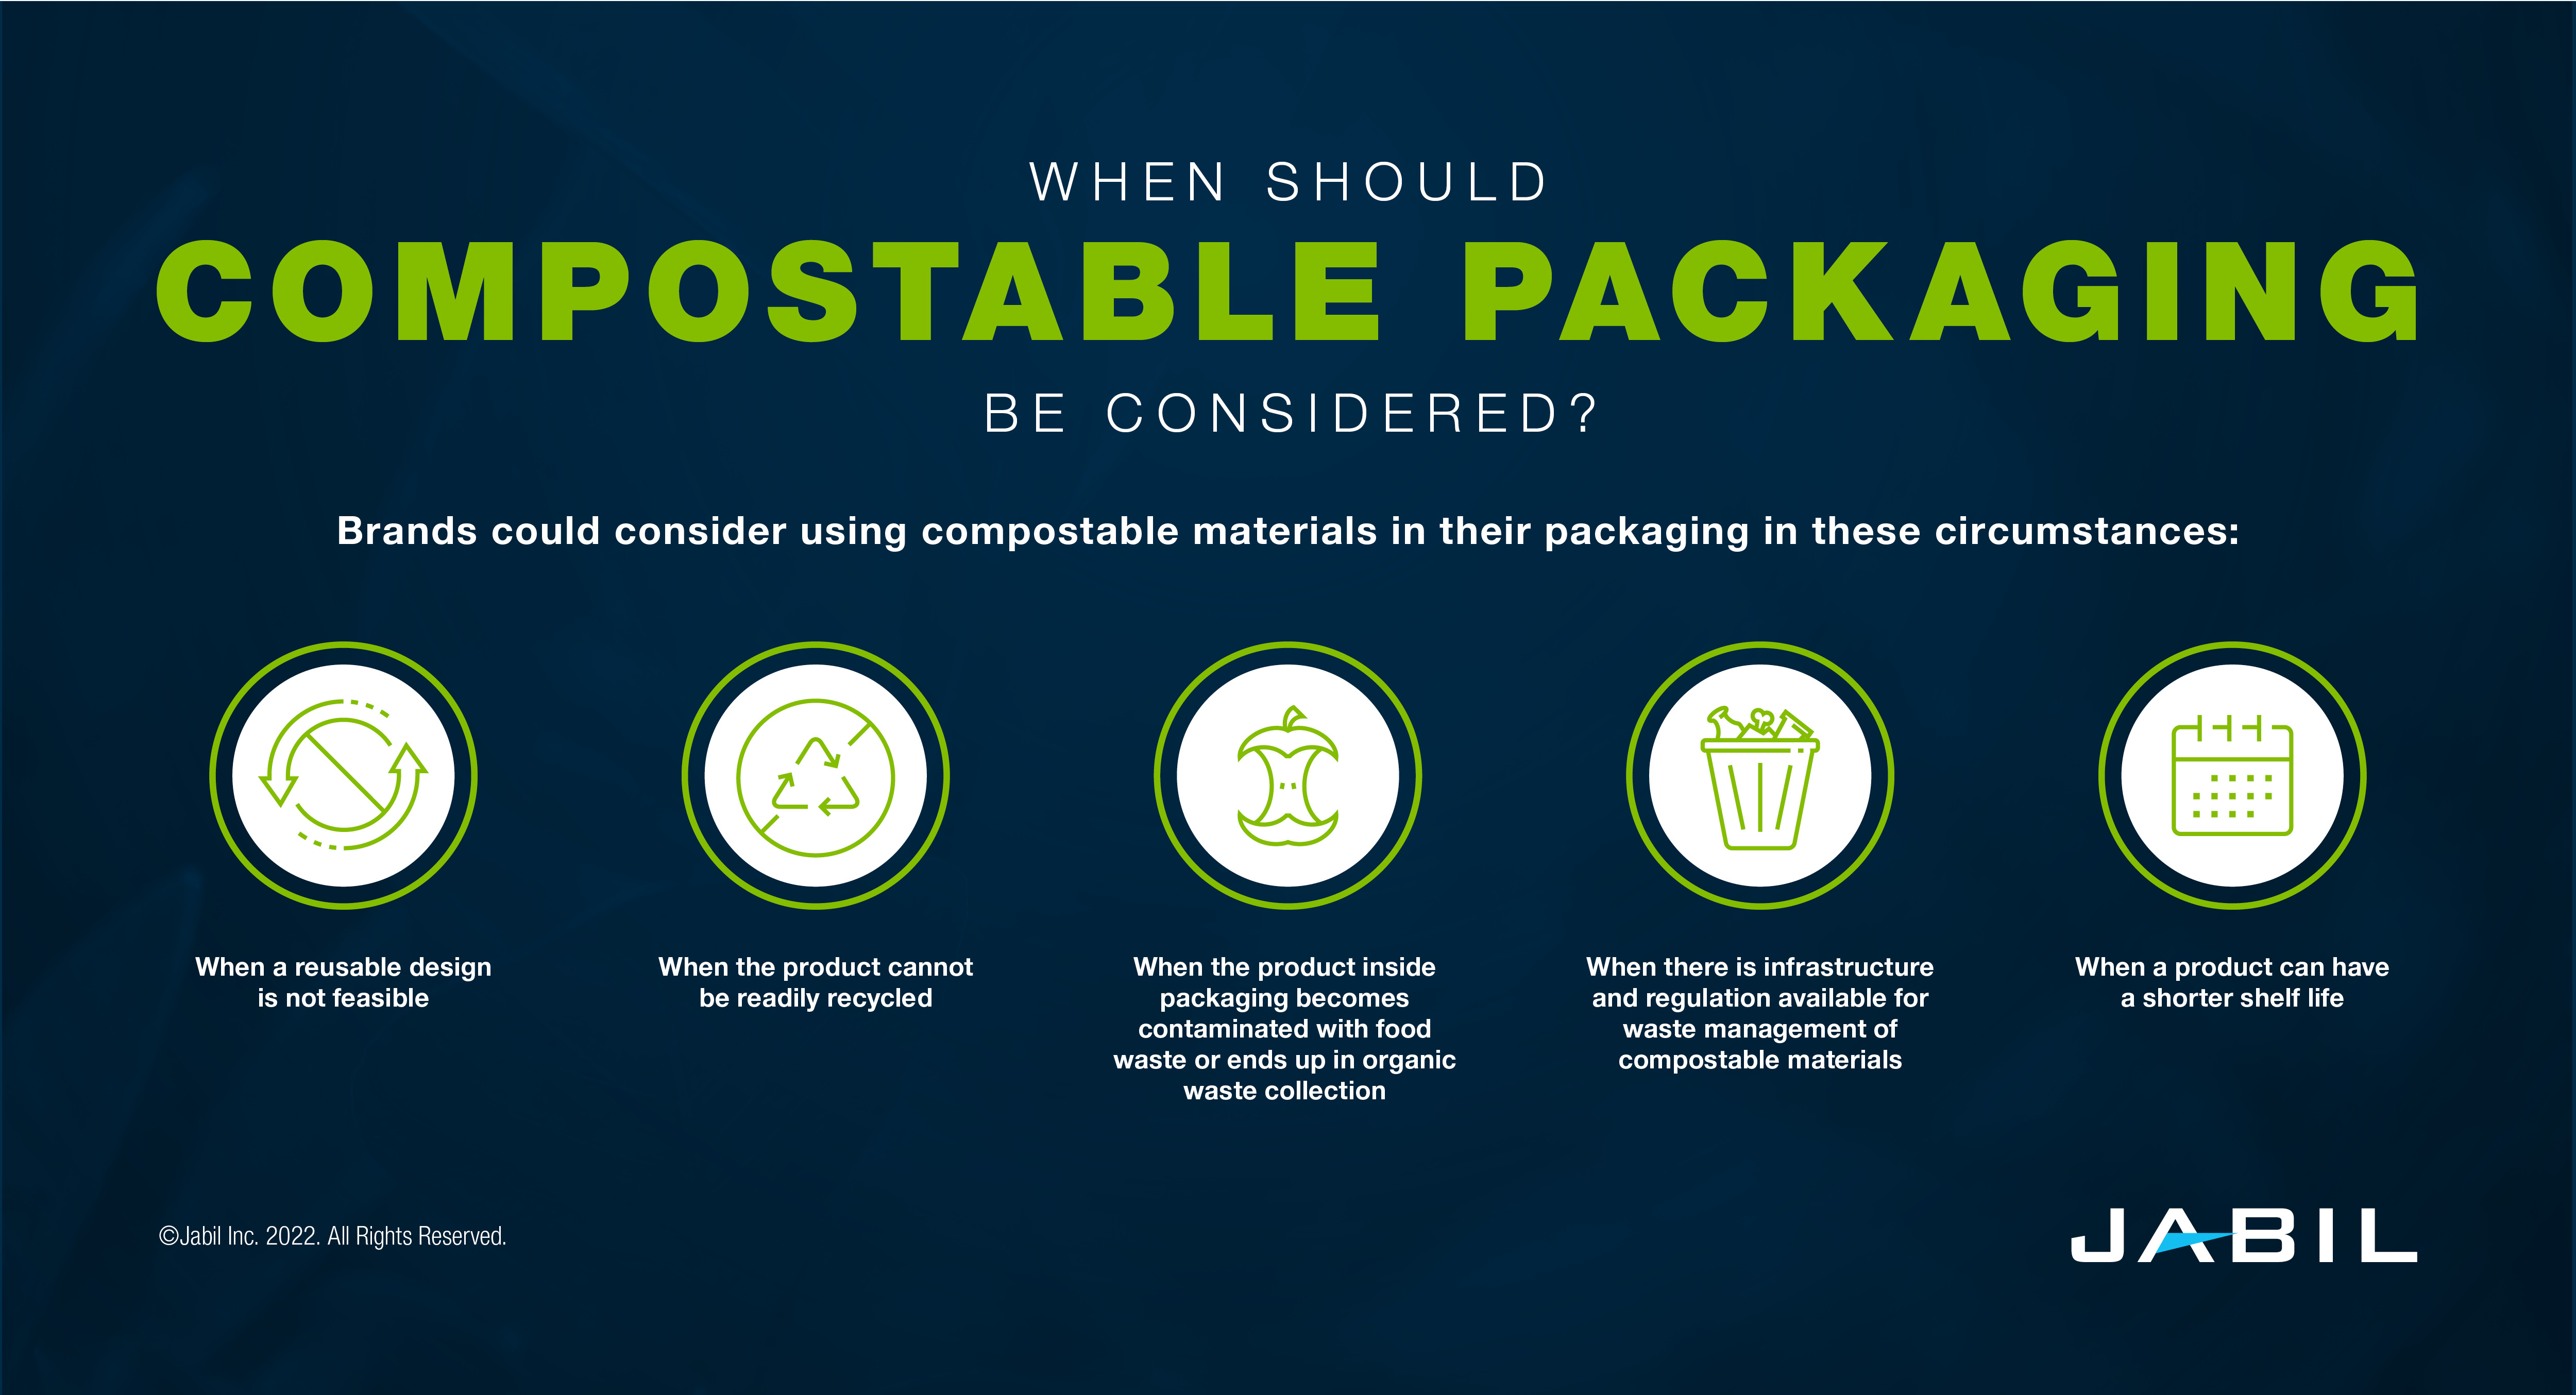 Compostable packaging (much like compostable clothing) is basically  irrelevant unless you actually plan to…